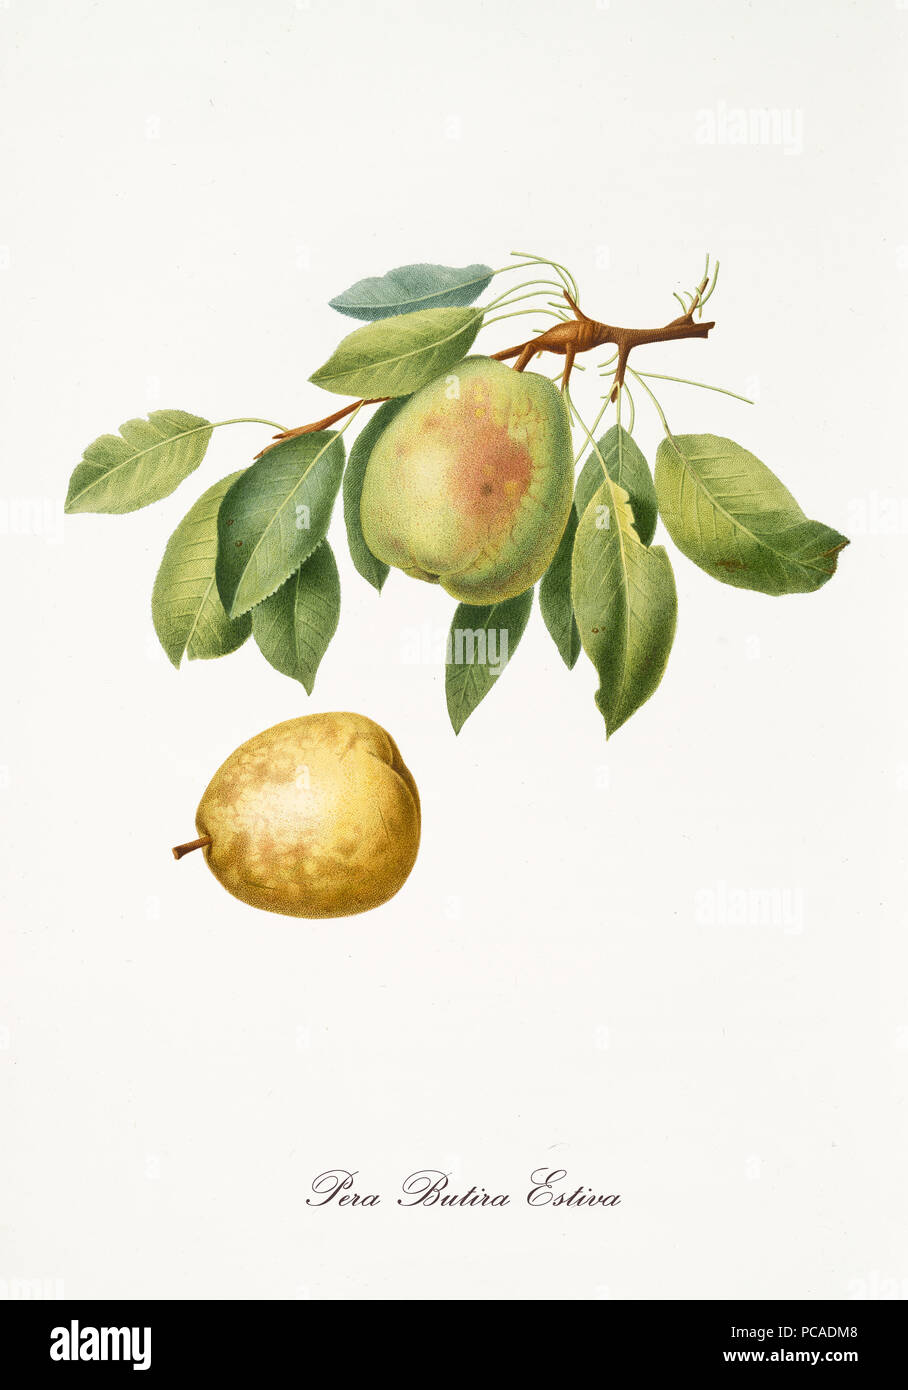 Single green pear with a little part of branch and leaves and isolated yellow pear on white background. Old botanical detailed illustration by Giorgio Gallesio on 1817, 1839 Stock Photo